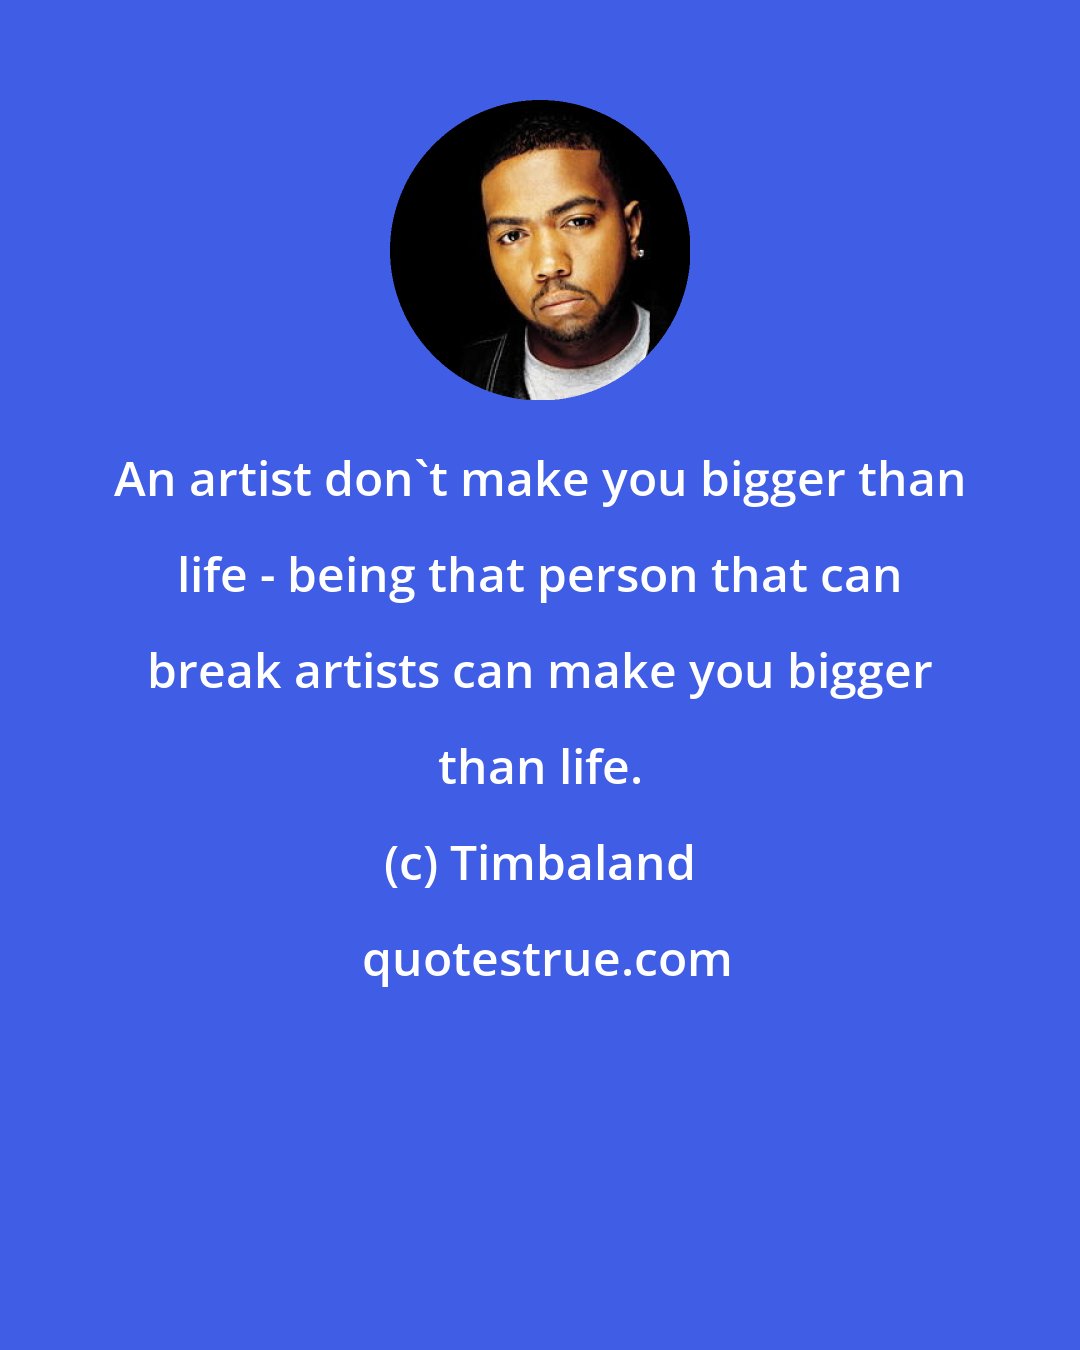 Timbaland: An artist don't make you bigger than life - being that person that can break artists can make you bigger than life.